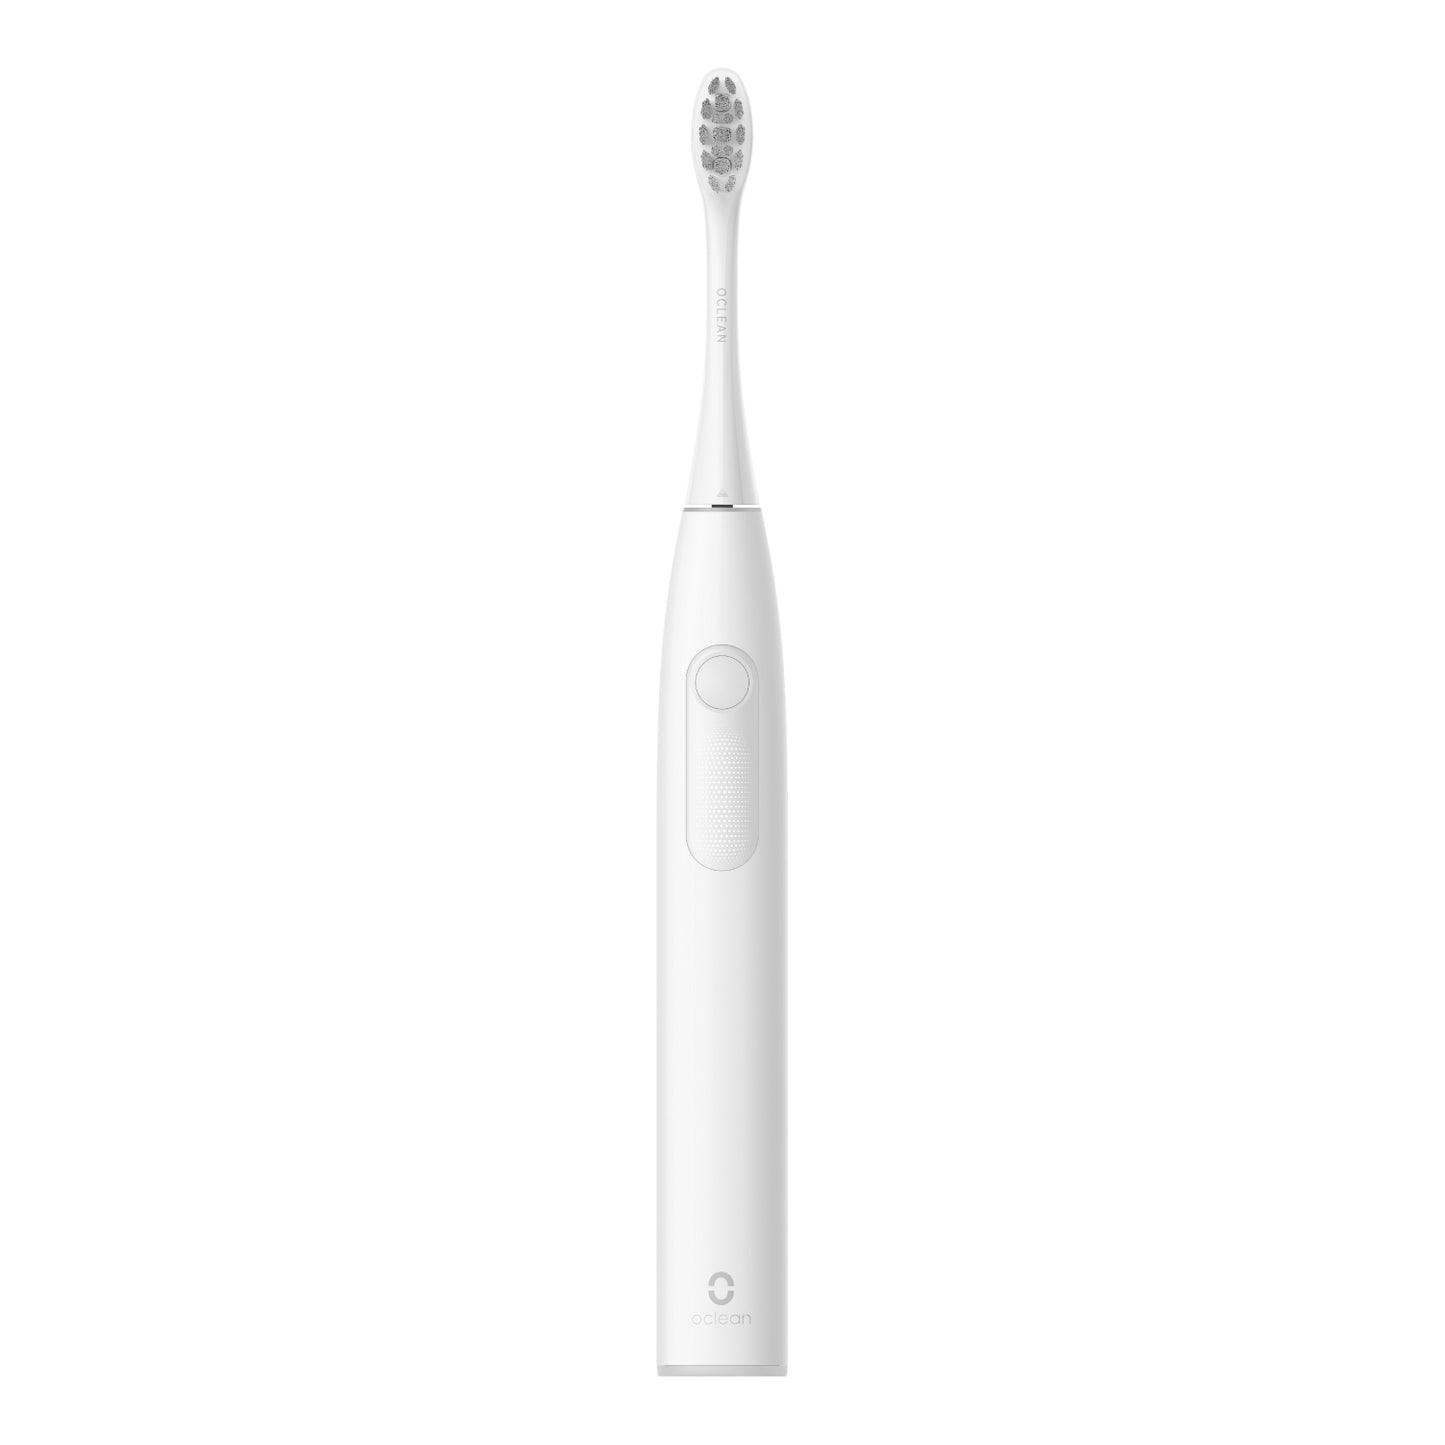 Oclean Z1 Sonic Electric Toothbrush-Toothbrushes-Oclean Global Store